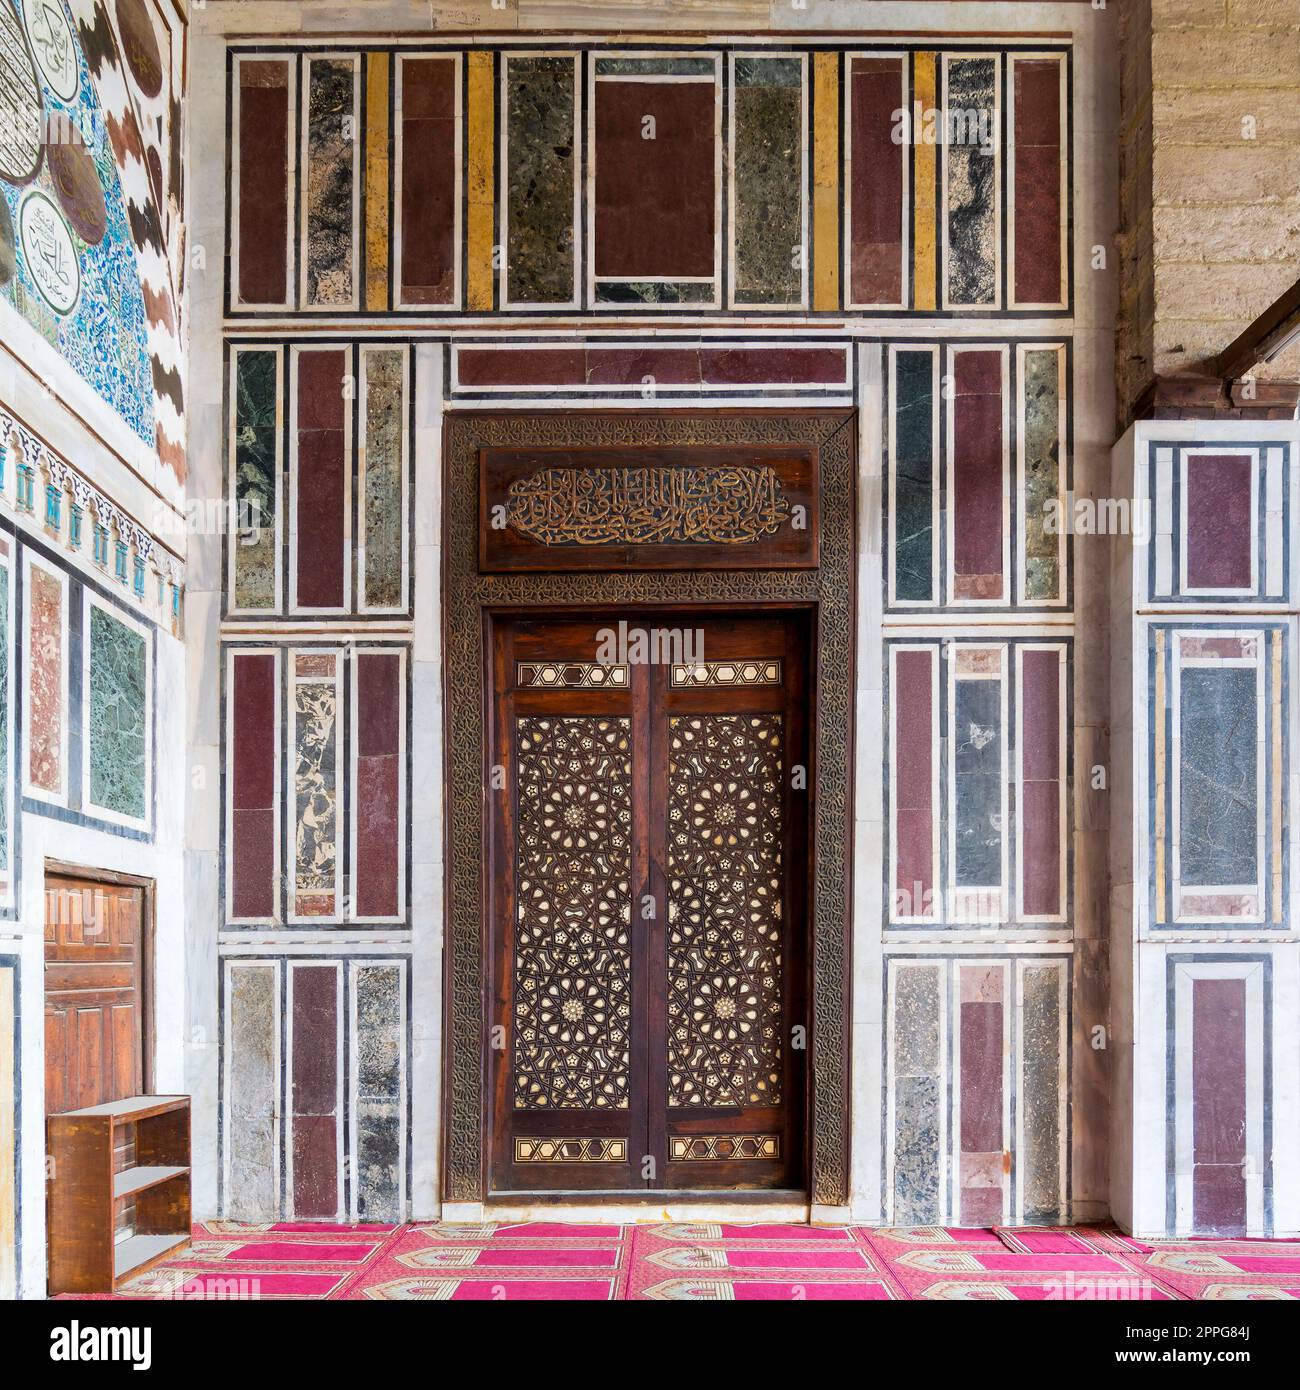 Old colorful marble wall with wooden door decorated with arabesque ornaments, Cairo, Egypt Stock Photo